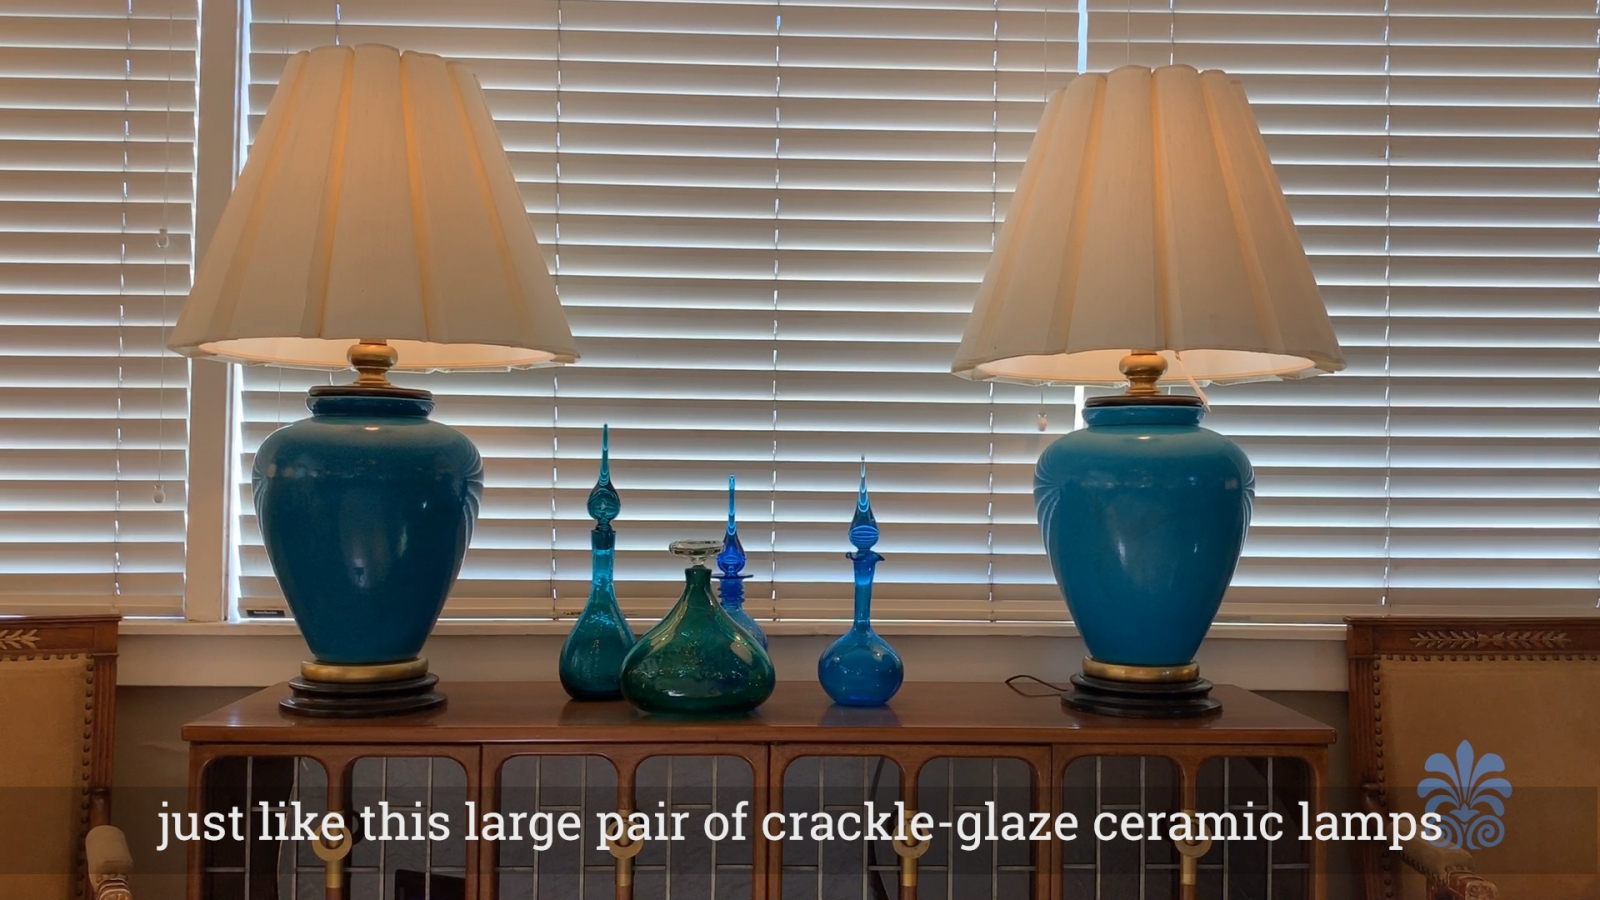 Striking And Large Pair Of American 1960's Turquoise Crackle-Glaze Ceramic Lamps By Frederick Cooper, 1960's.